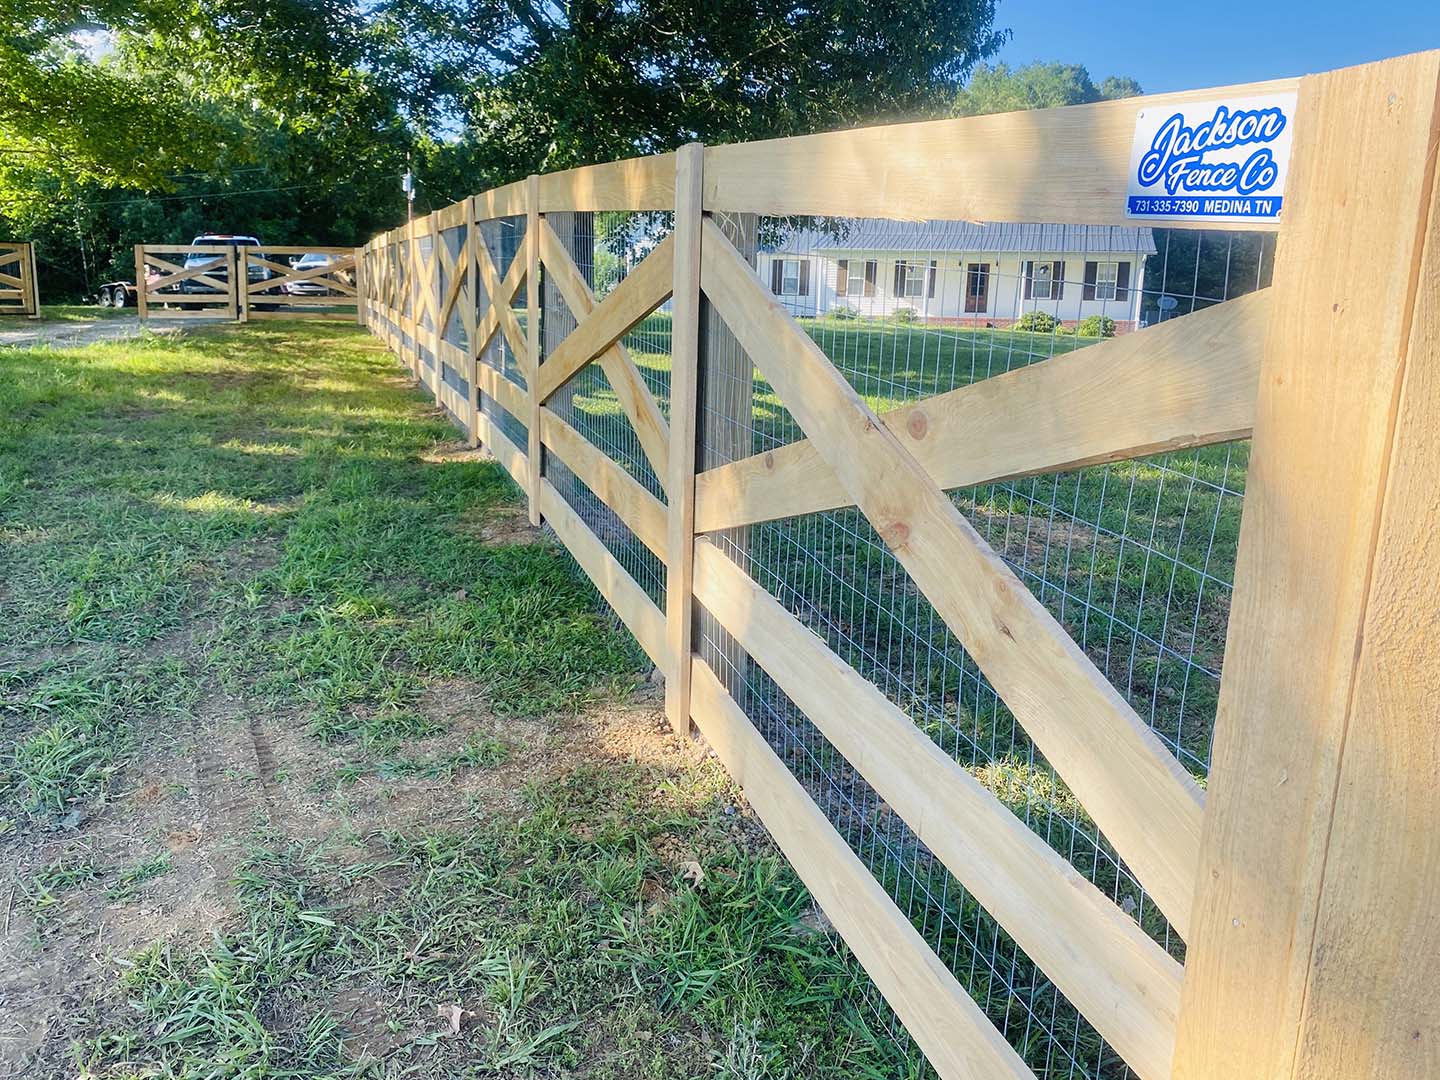  Union City Tennessee Fence Project Photo